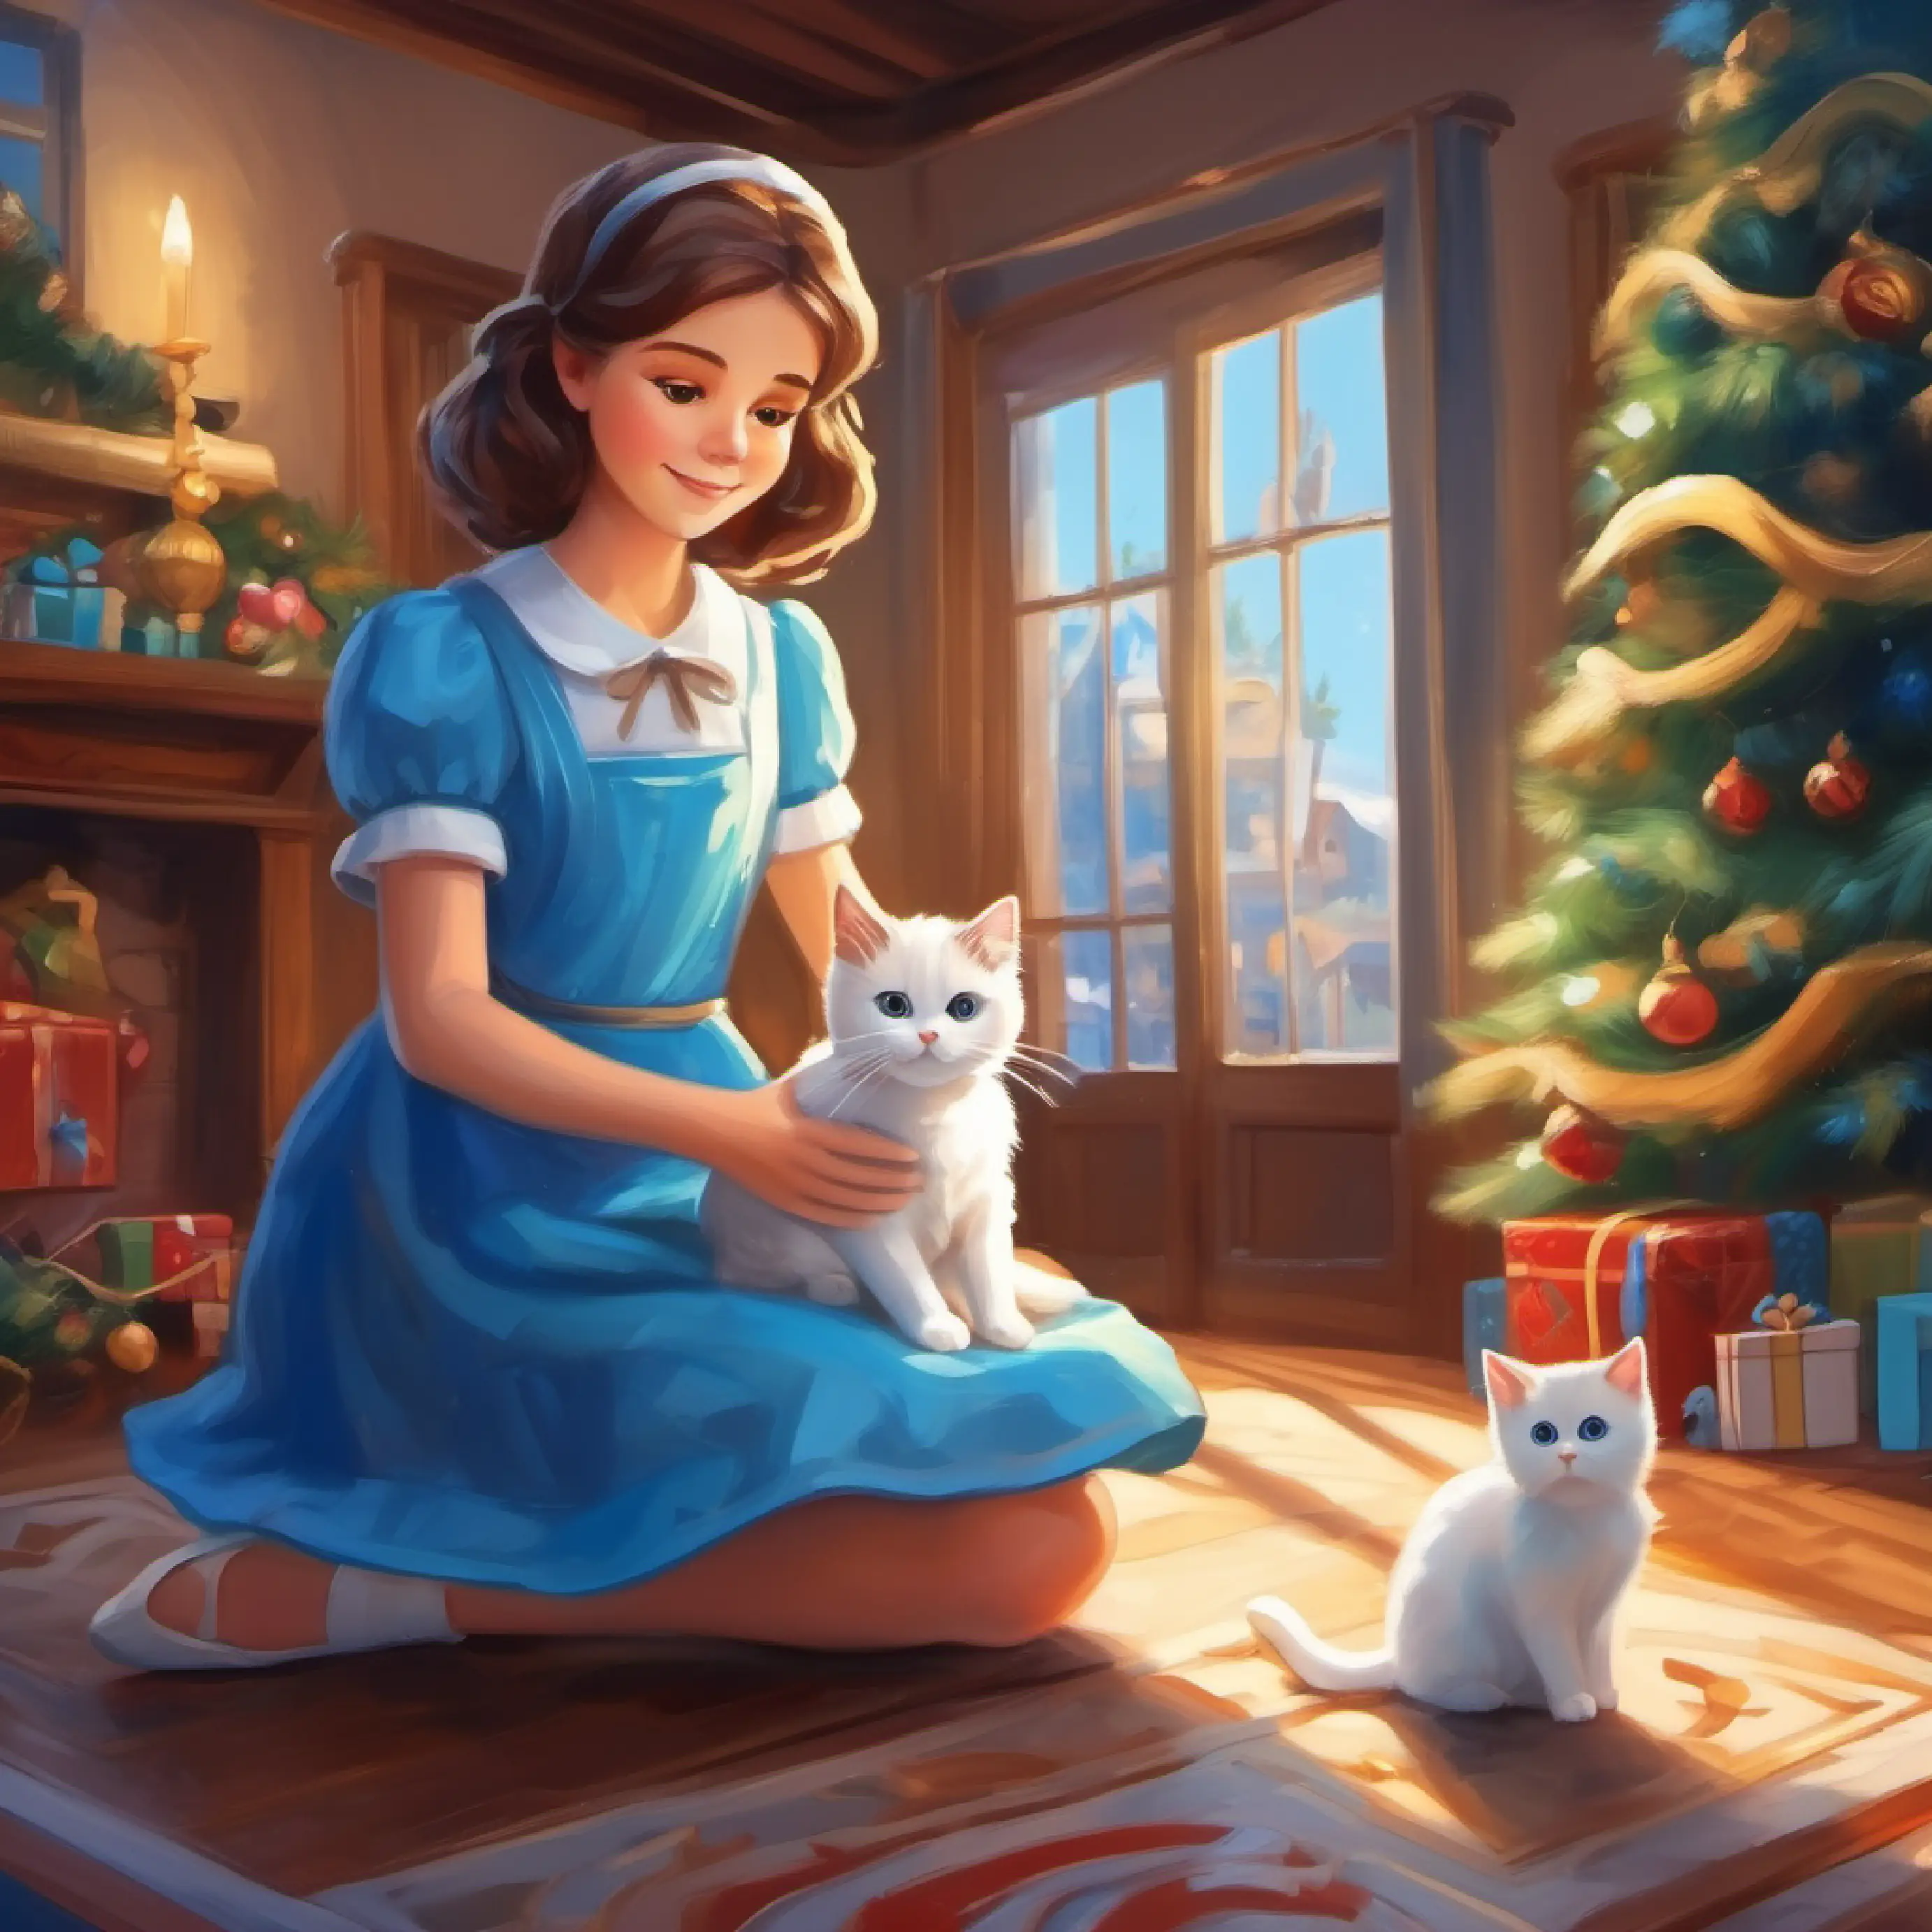 A girl with brown hair and eyes, wearing a blue dress showing patience, A small white cat with bright blue eyes, very fluffy playing, introduction of toy.